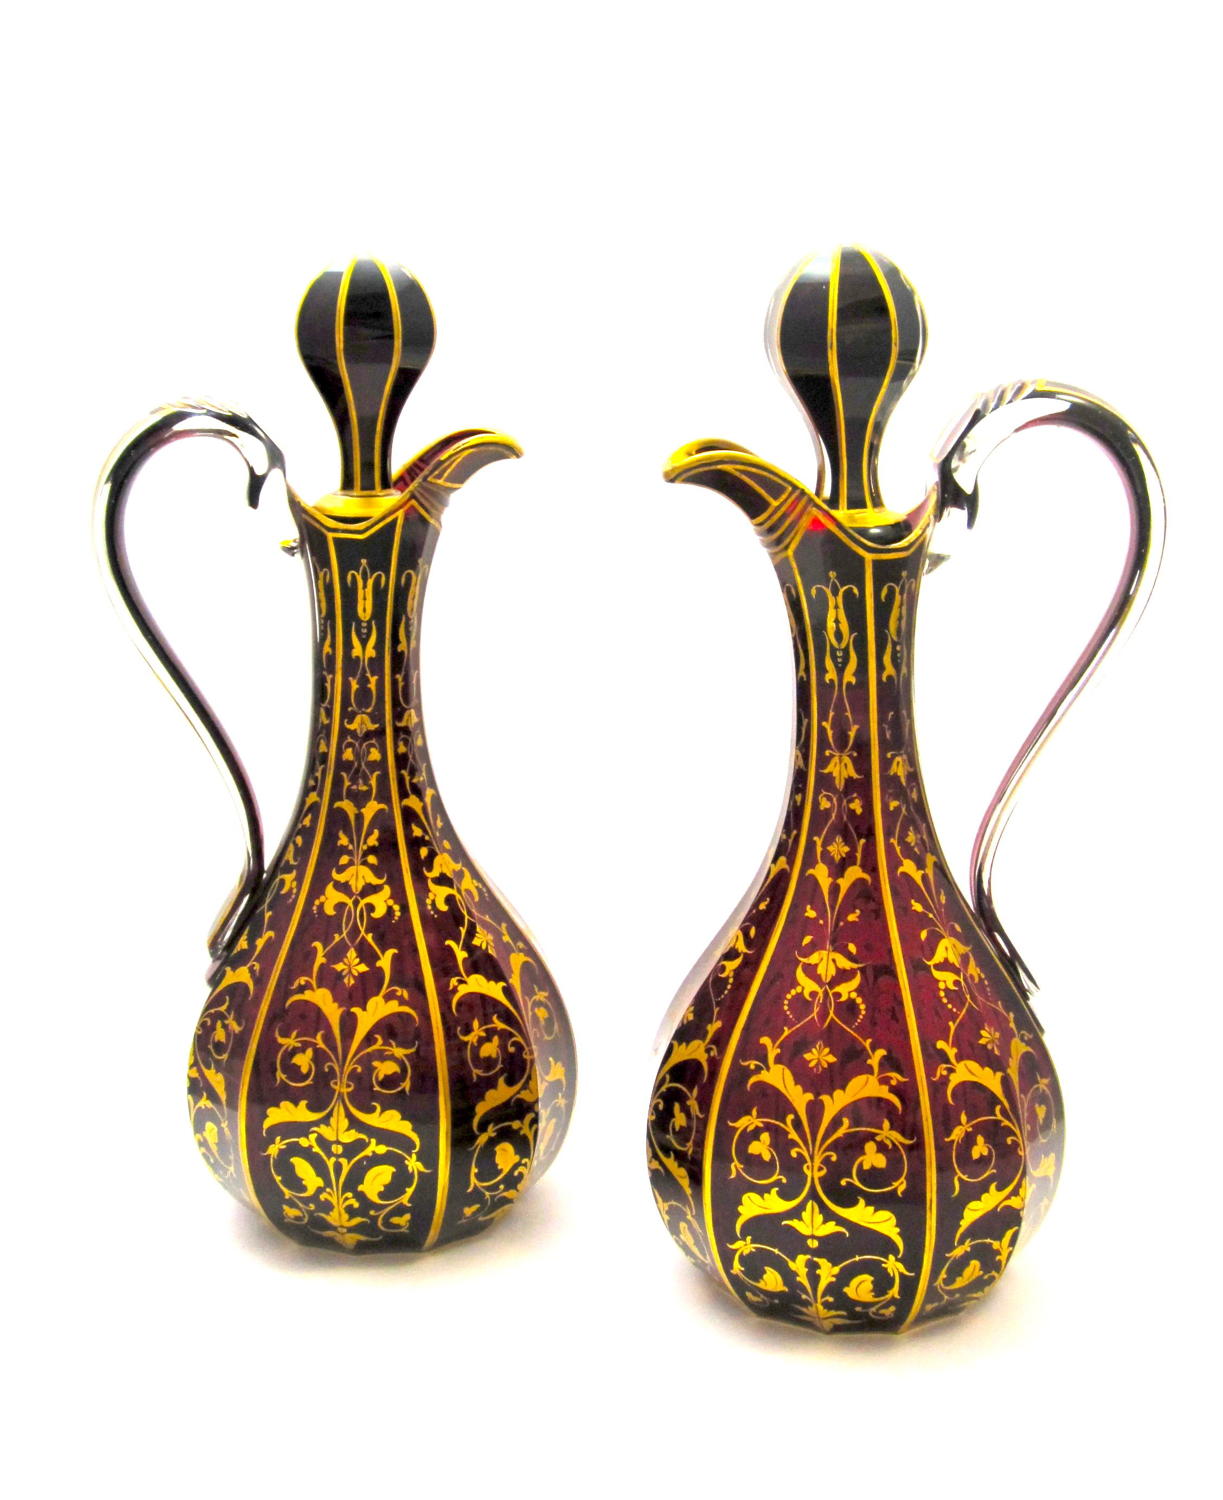 A Pair of Tall High Quality Bohemian Ruby Red Crystal Jugs